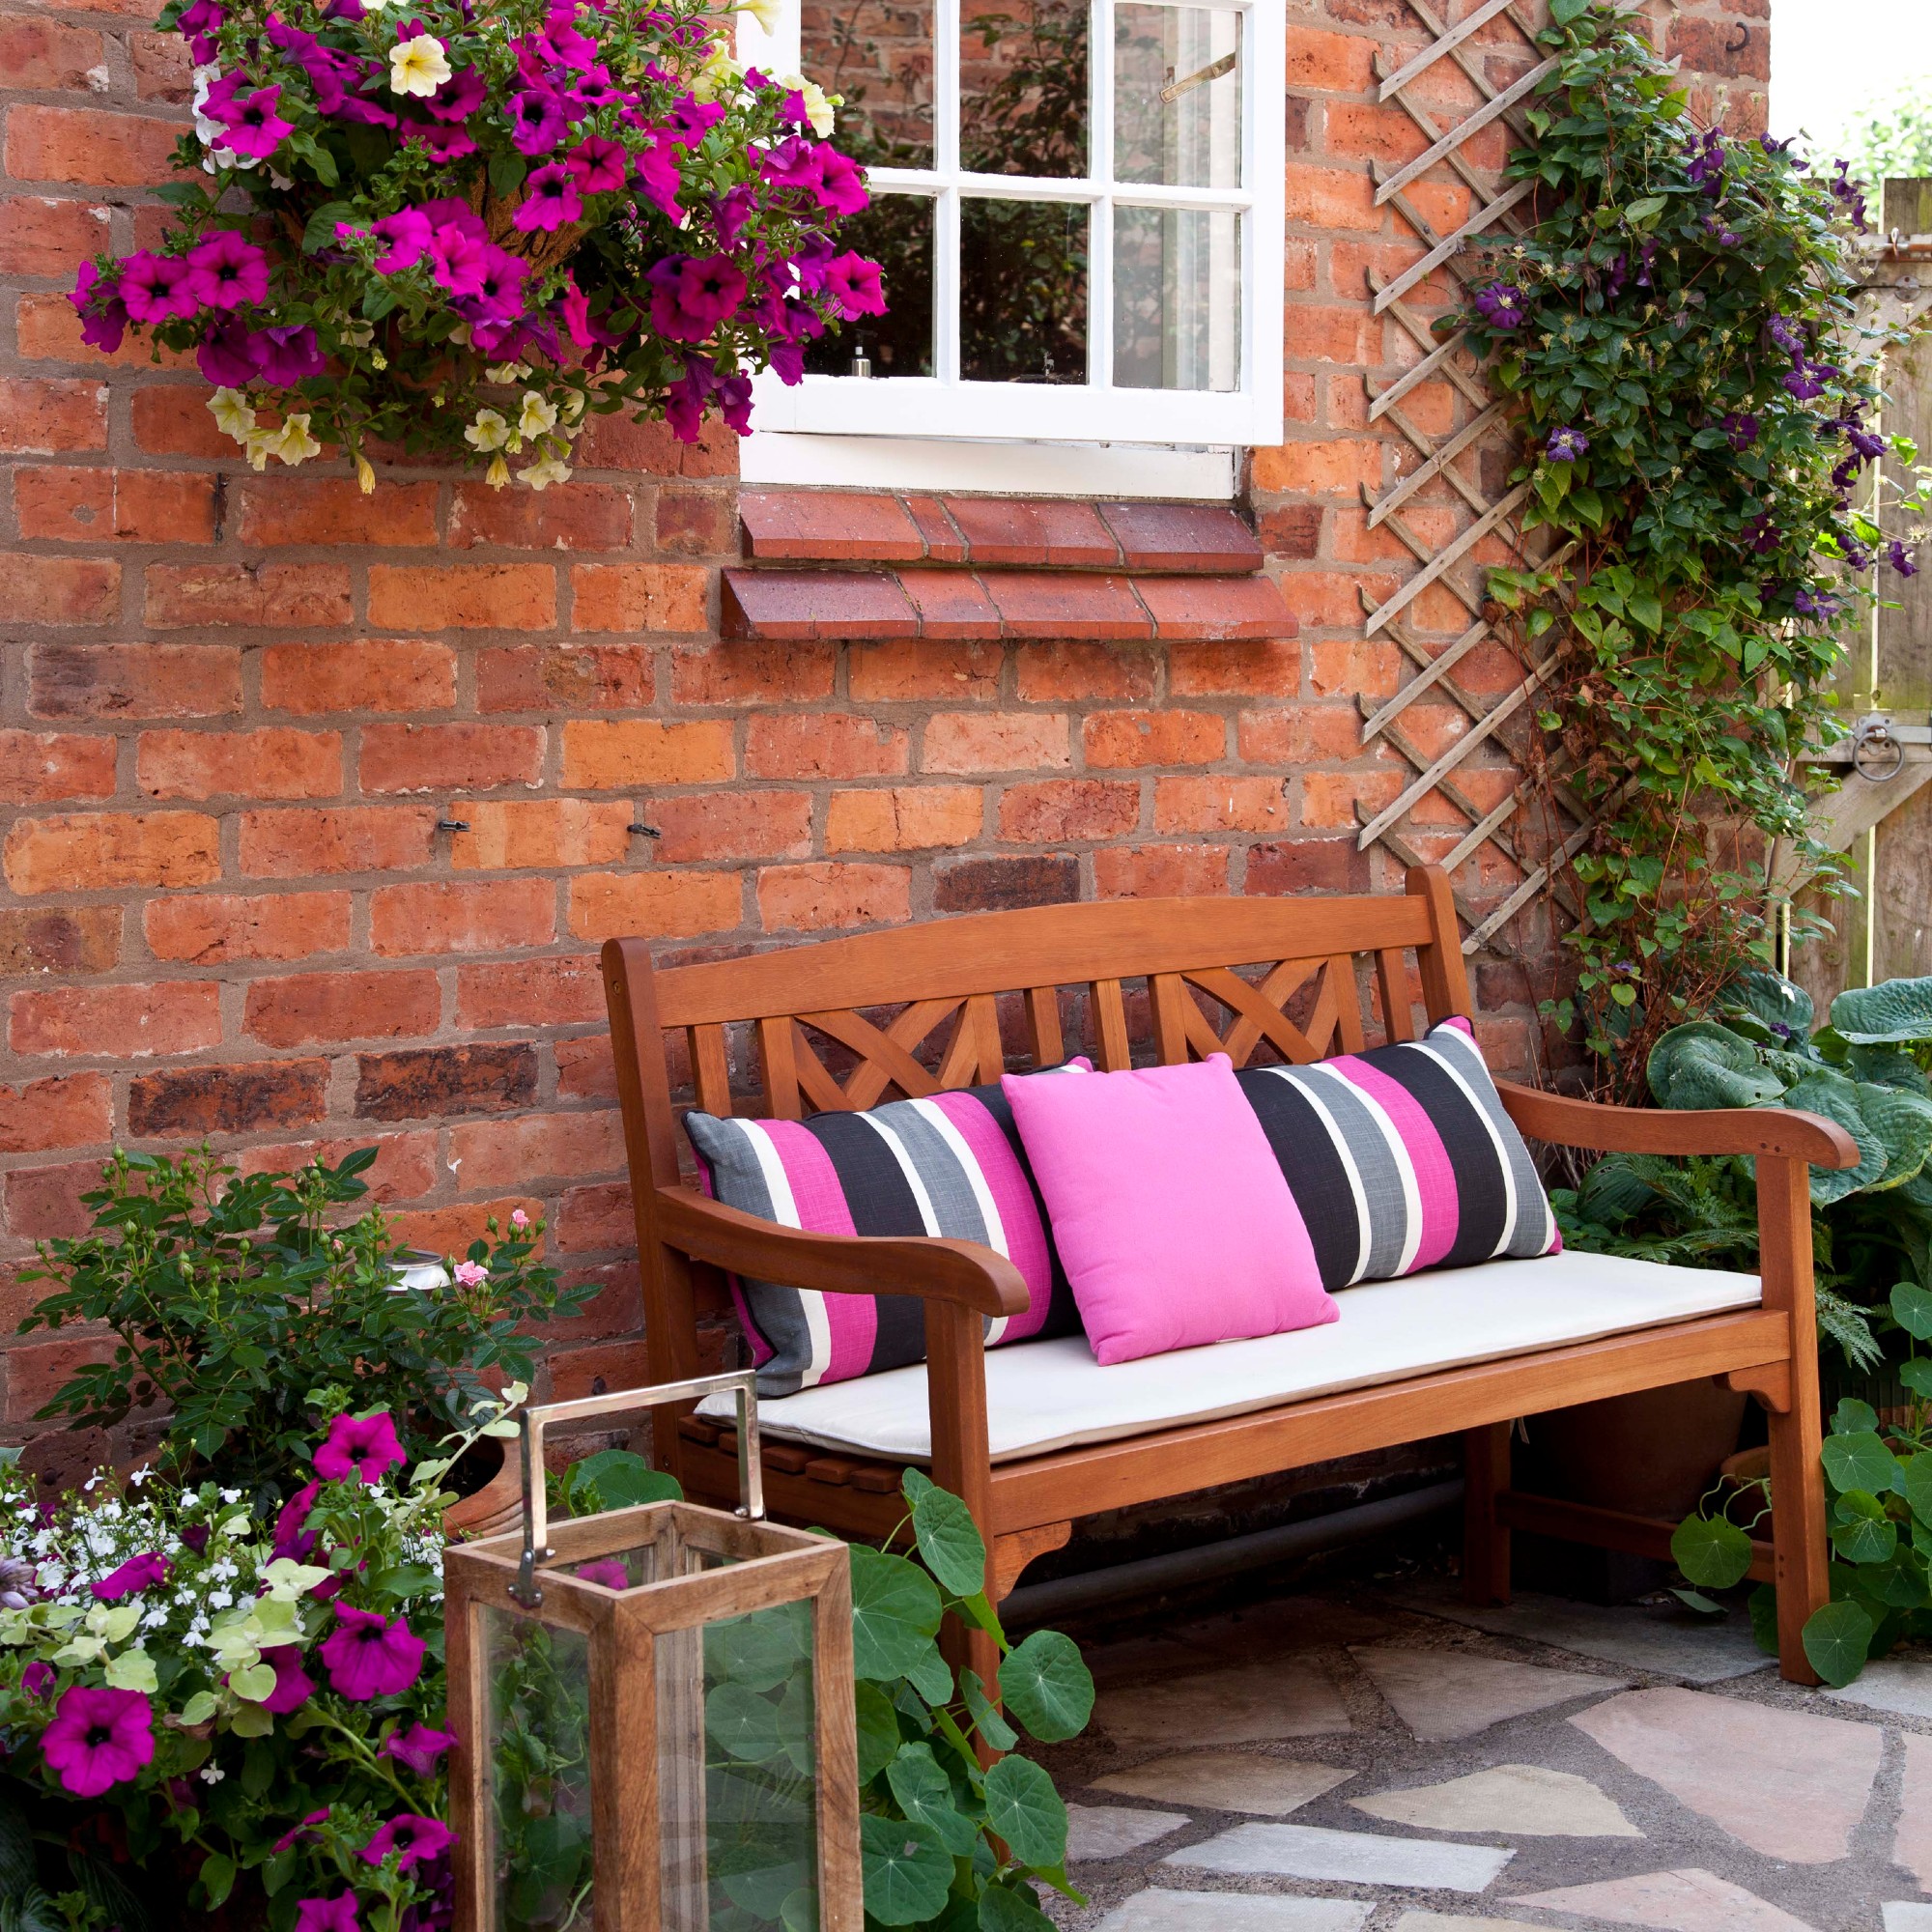 A patio with a garden bench with pink cushions surrounded by flowers